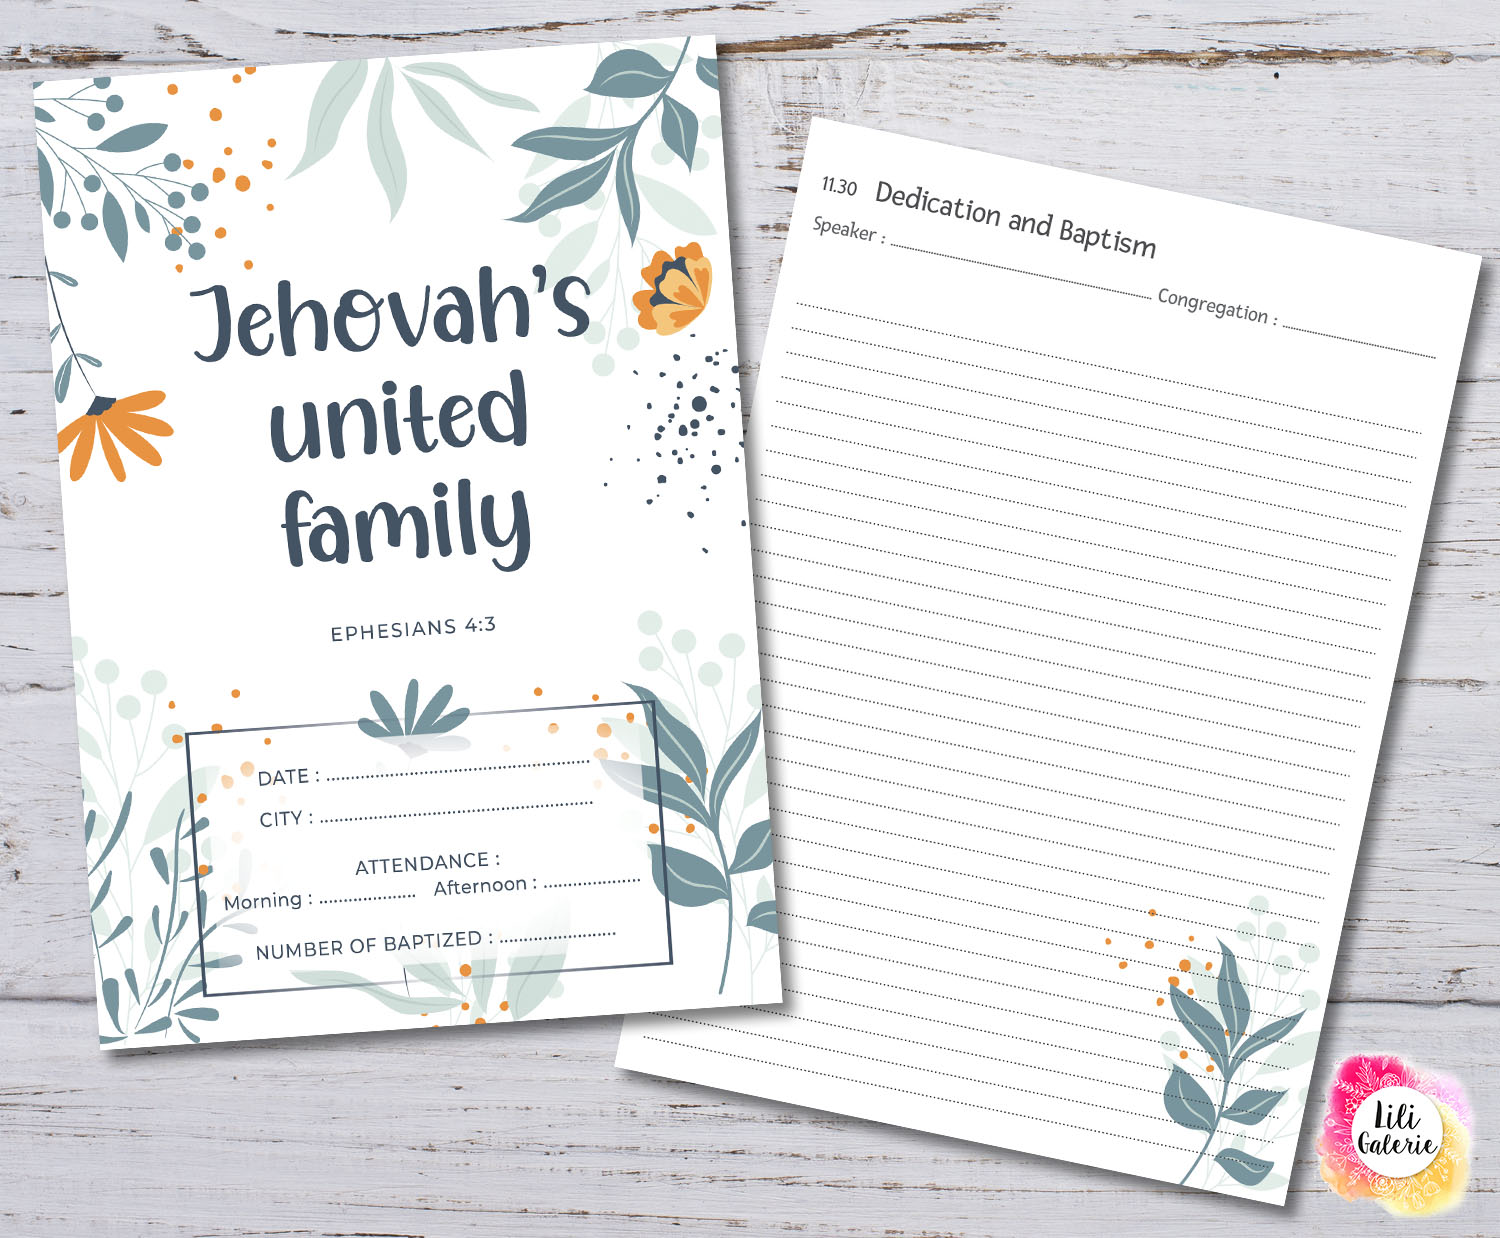 Jehovah's united family